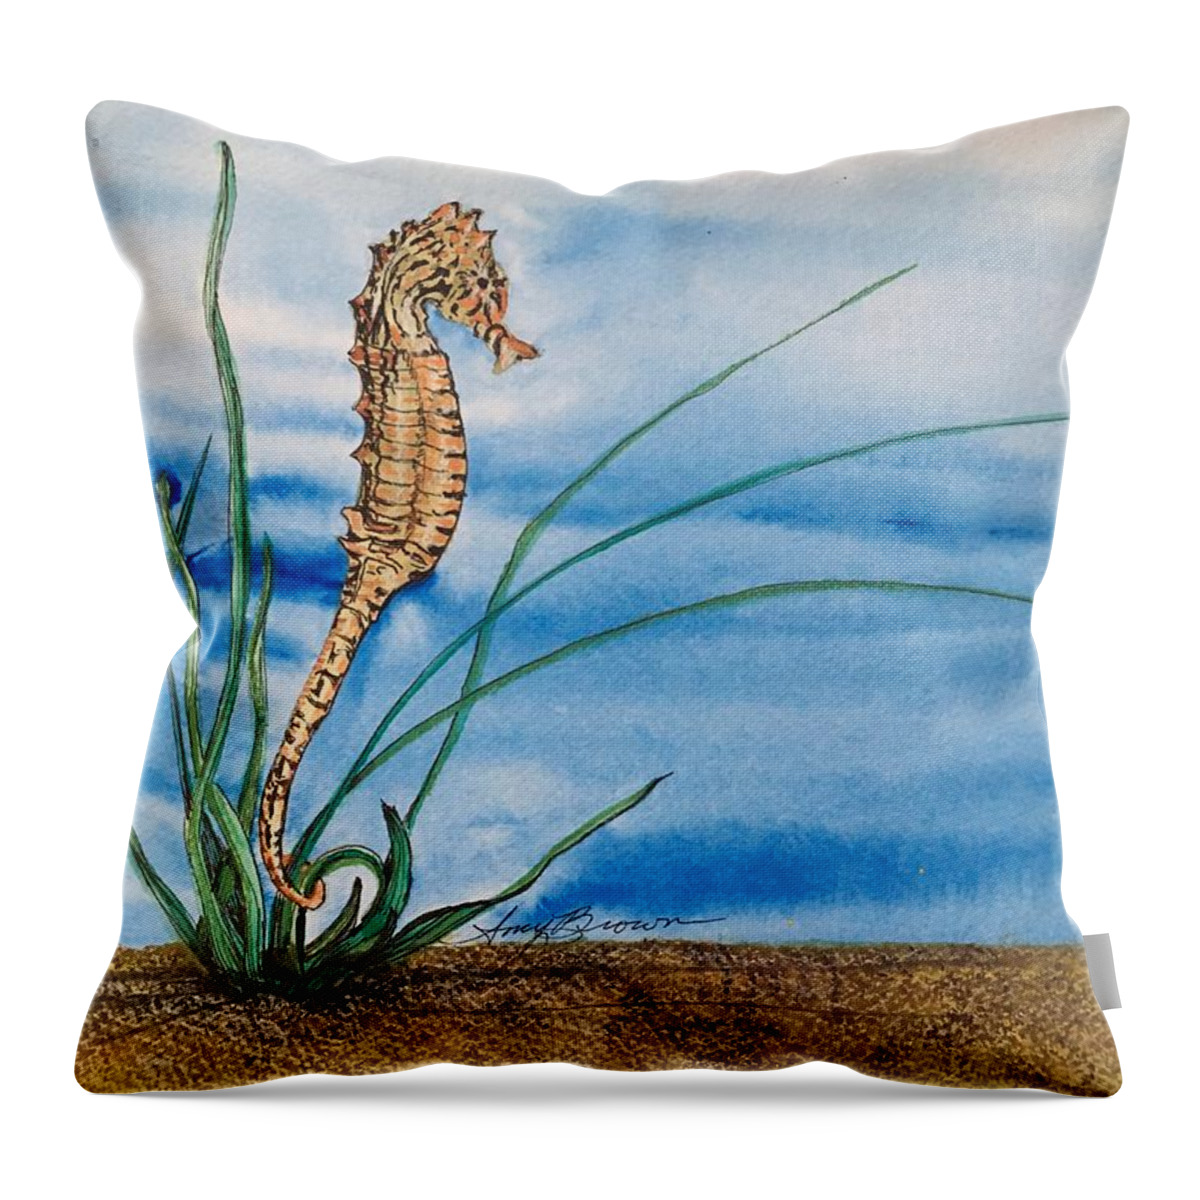 Northern Seahorse Throw Pillow featuring the painting Northern Seahorse by Mastiff Studios